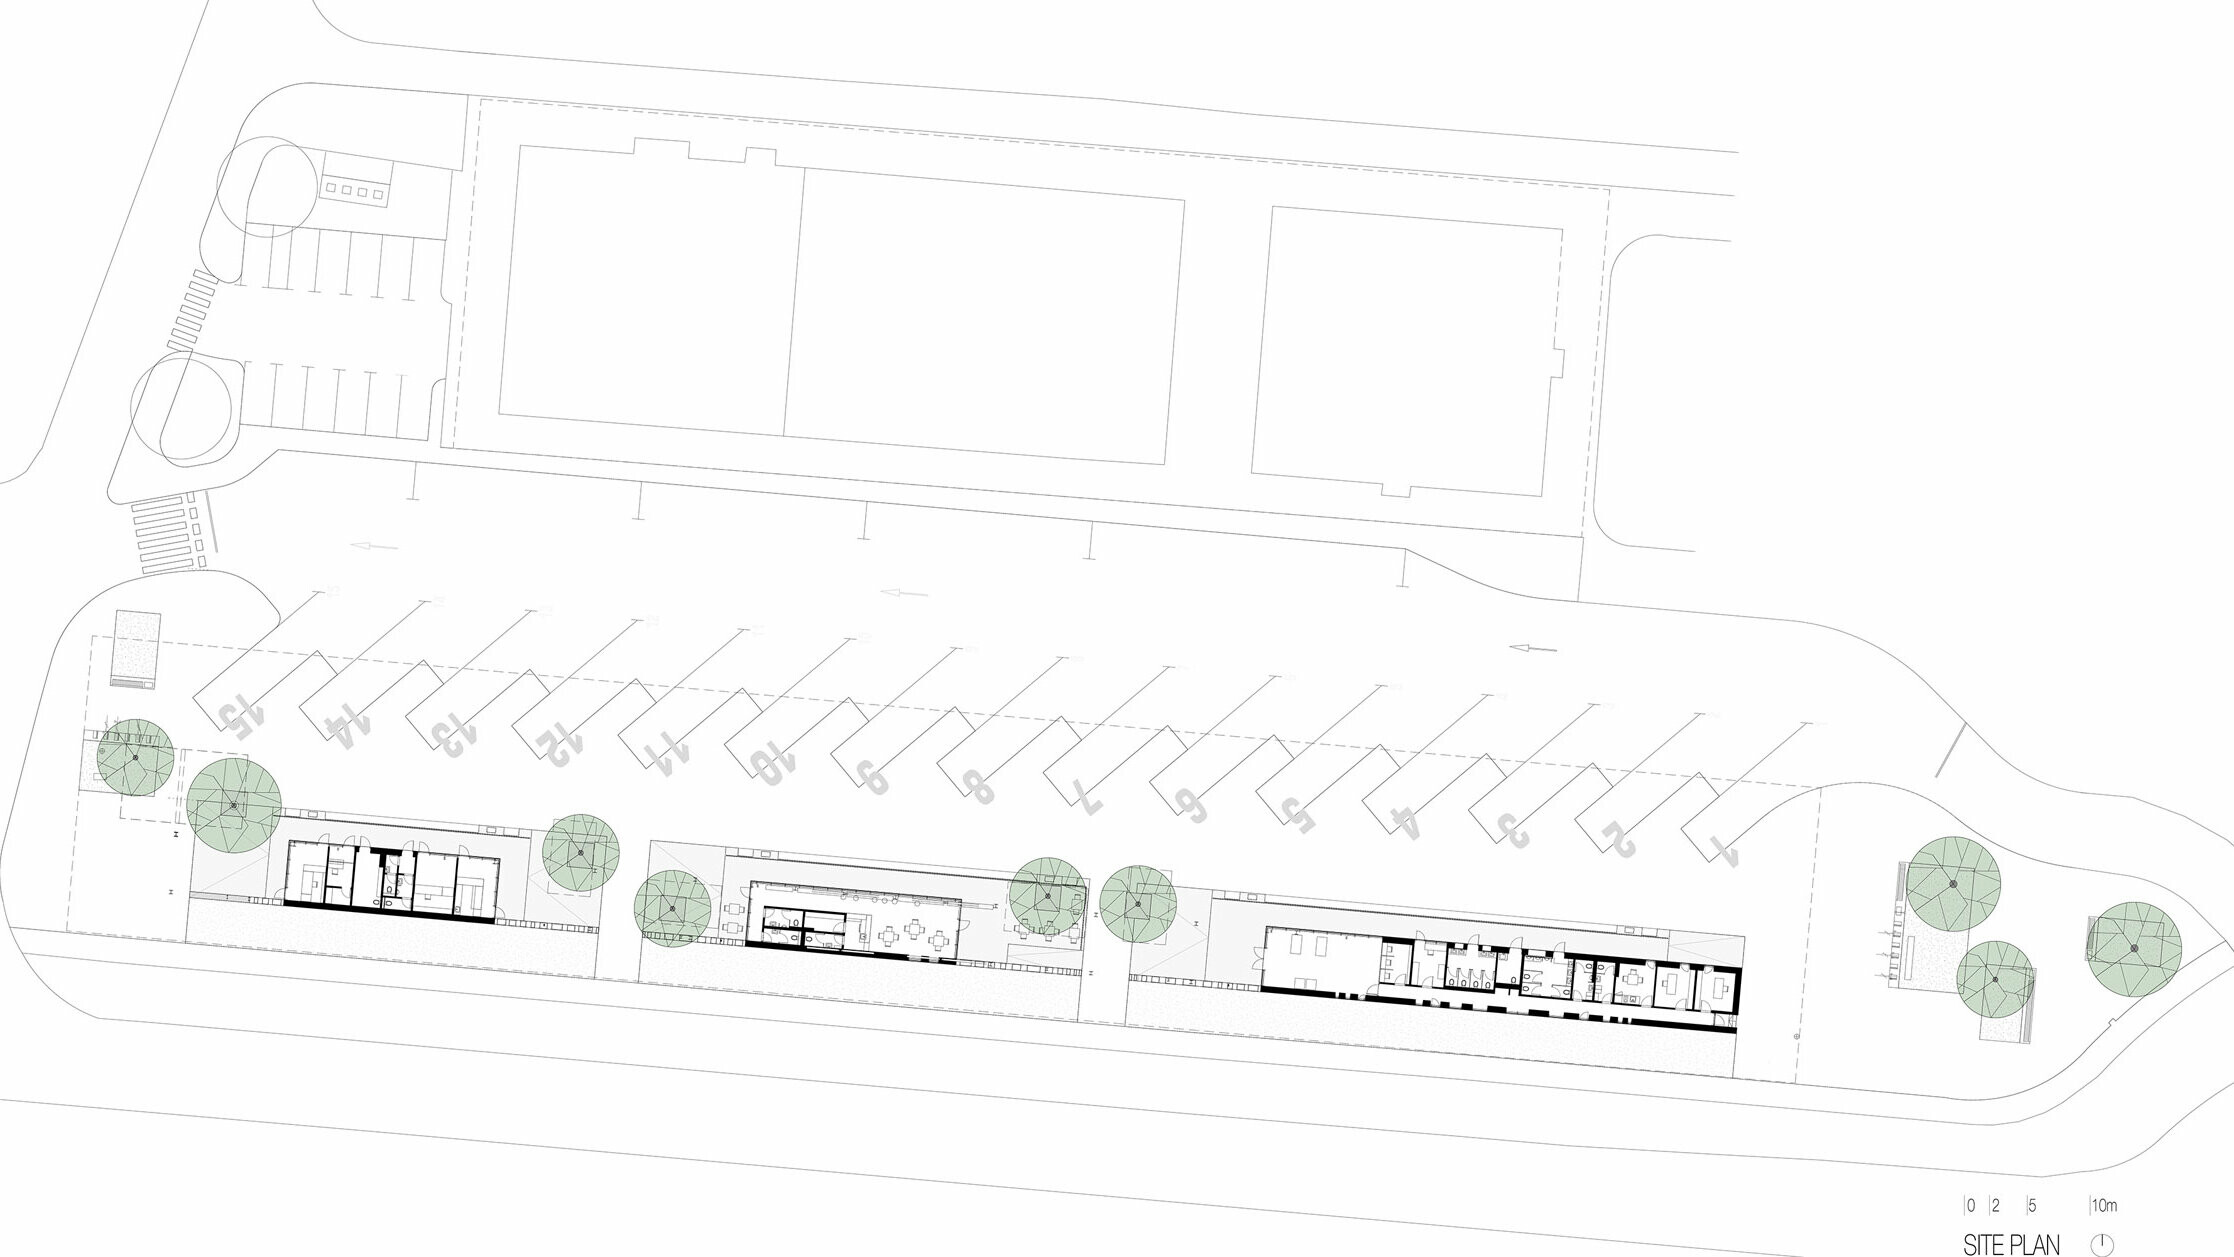 The site plan shows an overview of the "Autobusni Kolodvor Slavonski Brod" bus stop in Croatia. The drawing illustrates the arrangement of the bus platforms and car parks as well as the buildings and green areas on the site. The buildings of the bus stop can be seen in the centre of the plan, interrupted by several trees. The bus platforms are numbered and arranged along the top of the plan, while the car parks are located at the bottom. The site plan provides a clear representation of the entire site and its structural elements, including paths, car parks and greenery.